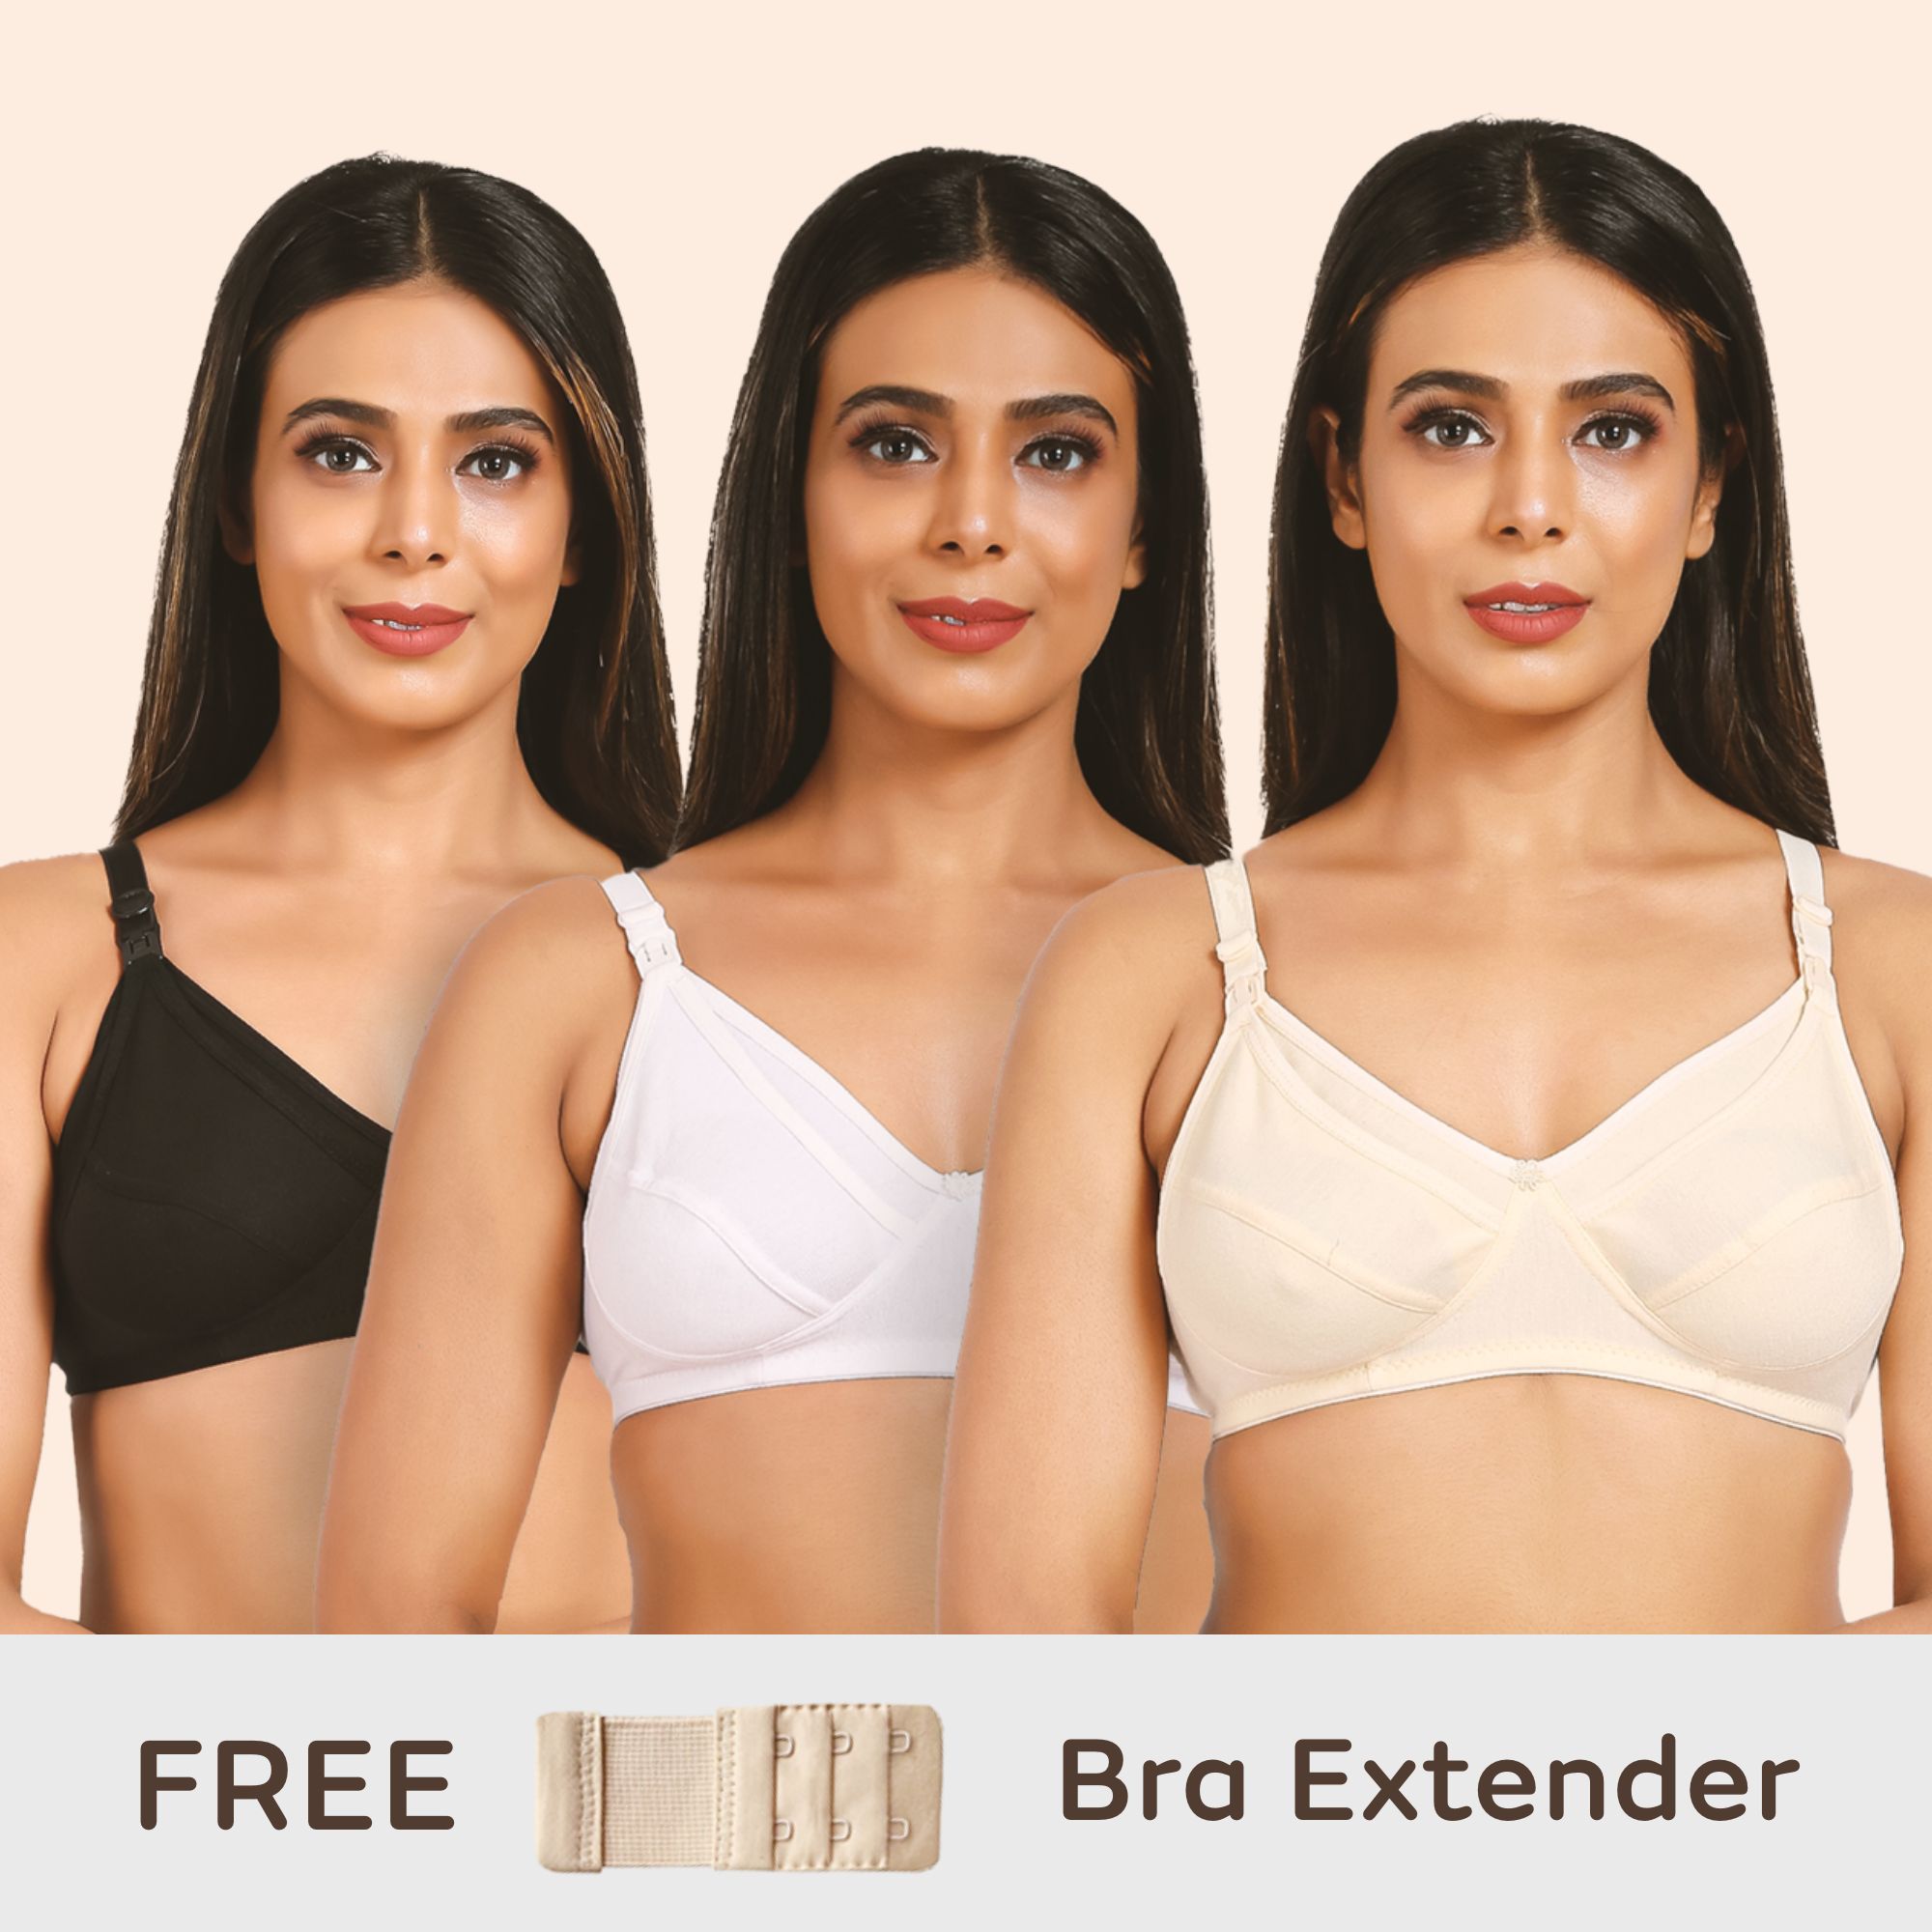 Maternity/Nursing Bras Non-Wired, Non-Padded - Pack of 3 with free Bra Extender (Classic Black, Classic White, Magnolia Cream) 36 B